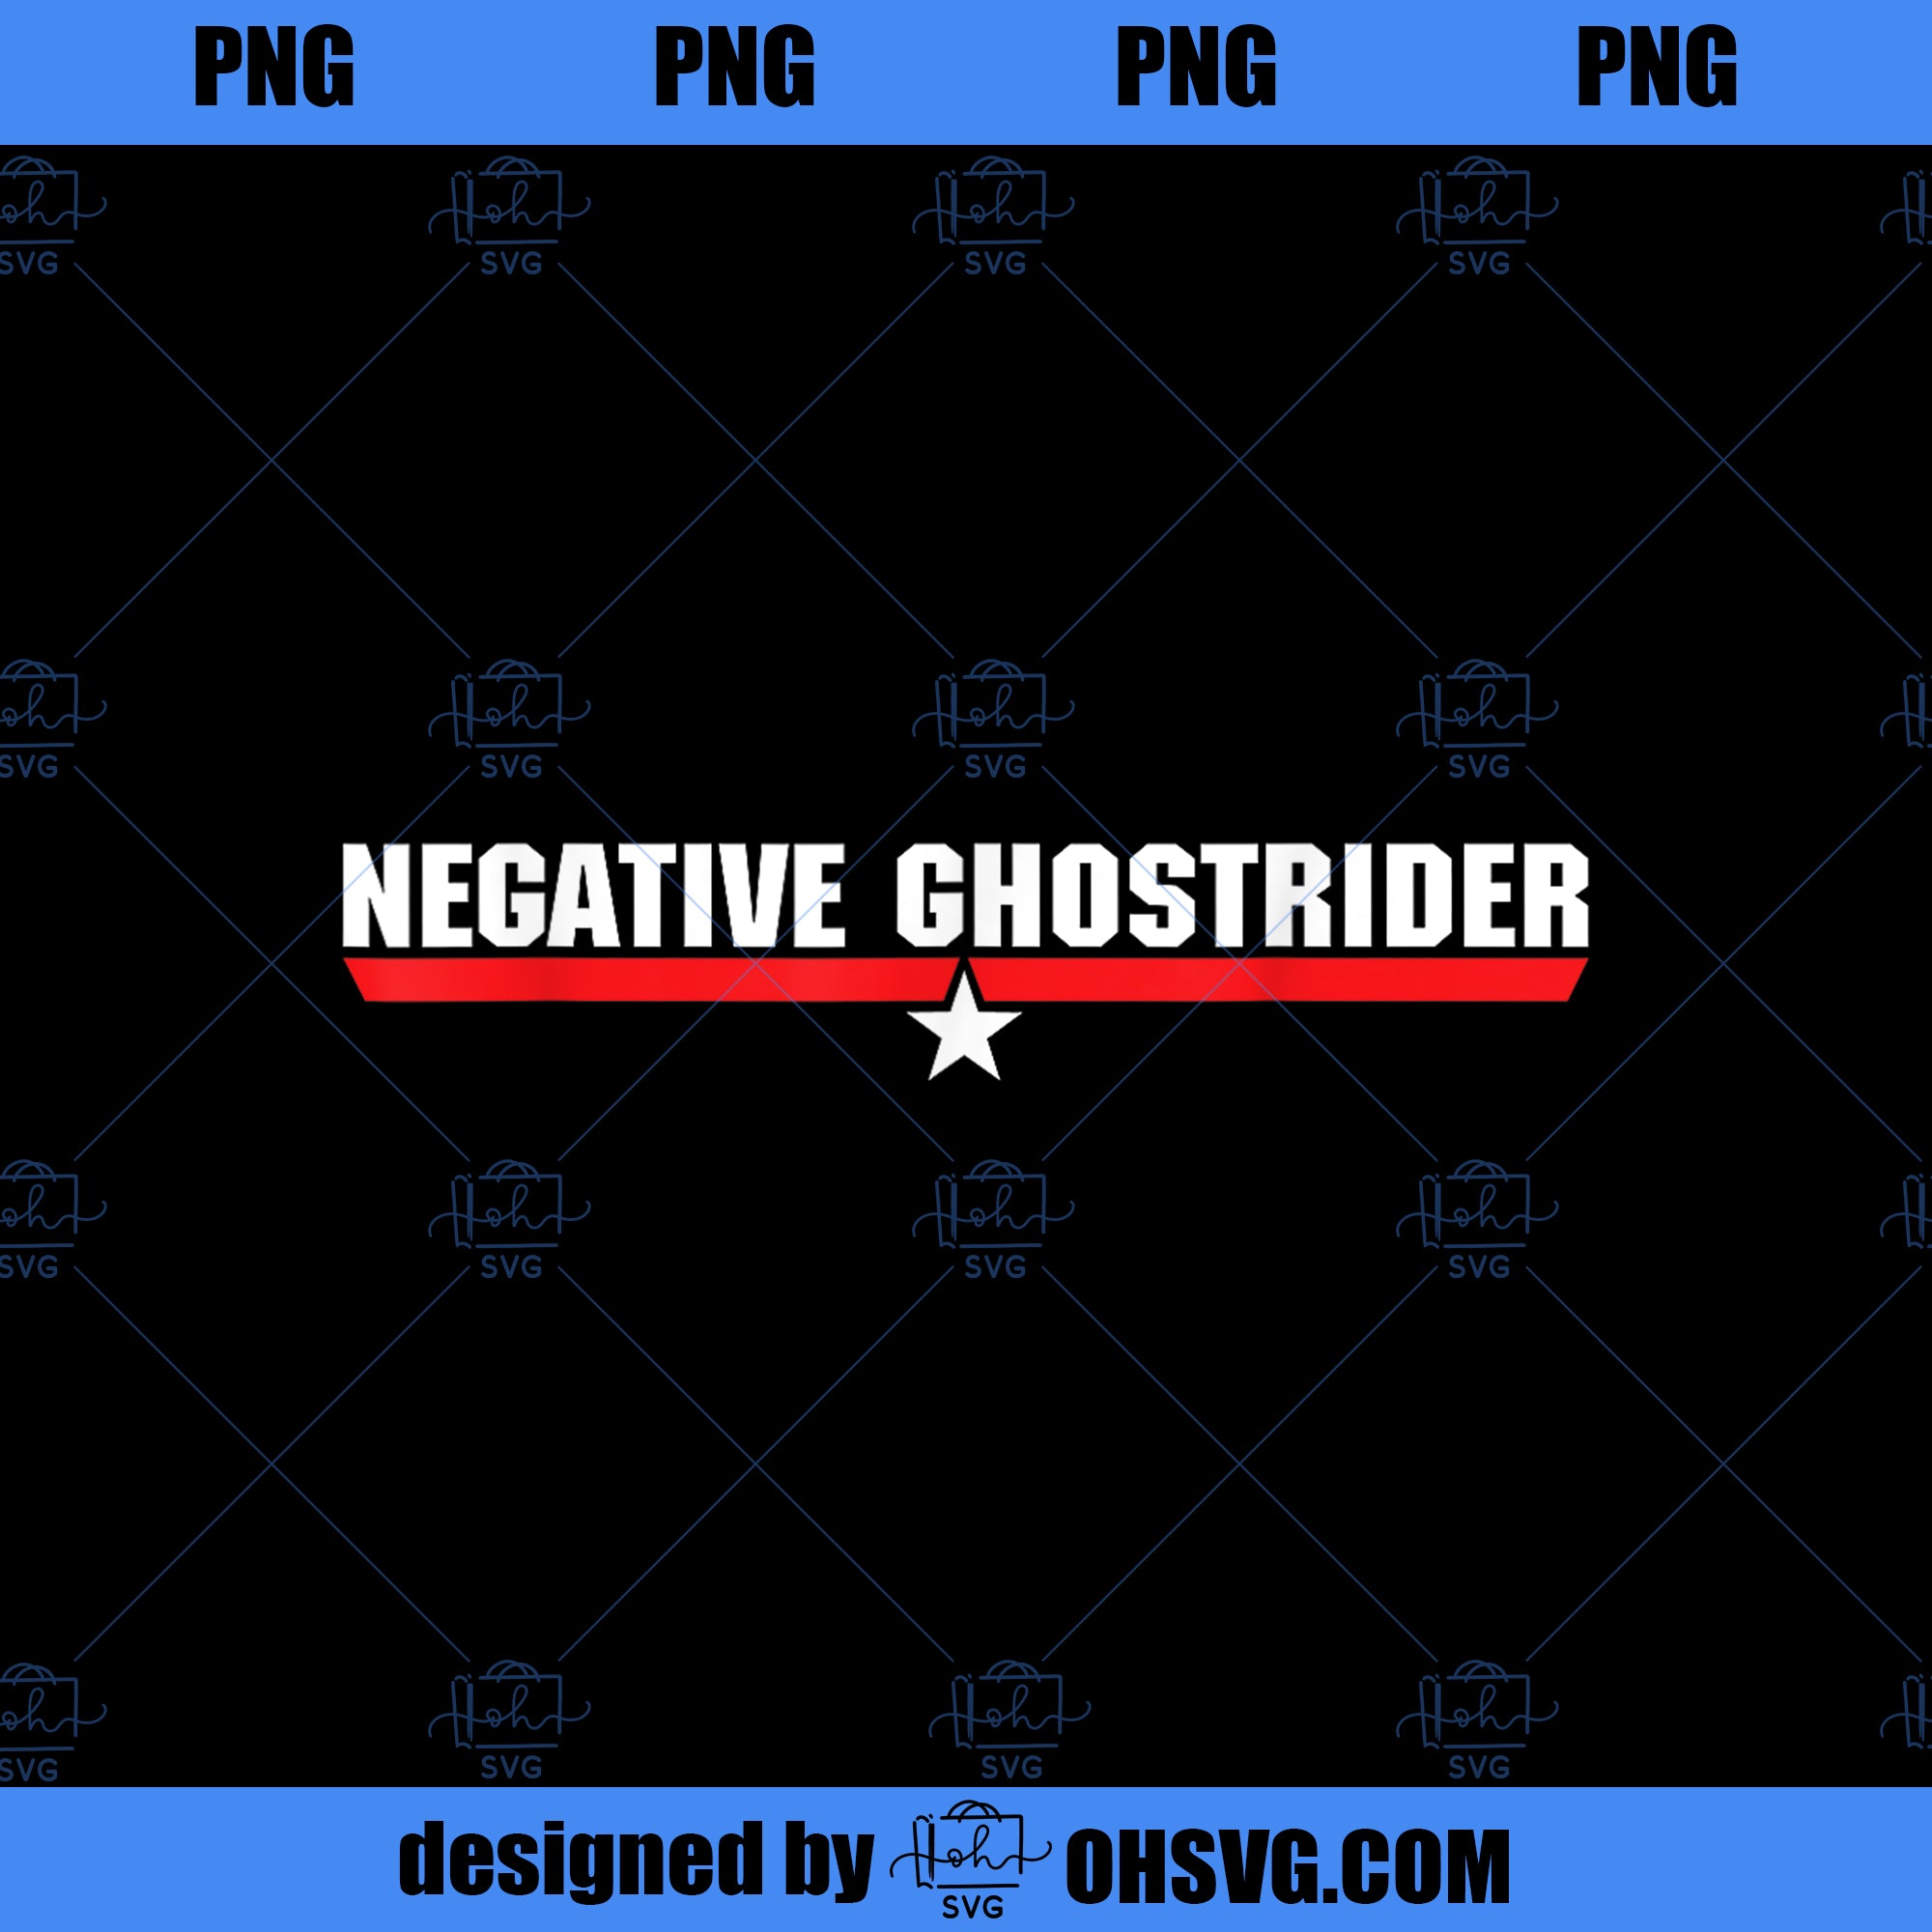 Negative Ghostrider 80 s Movie Tee PNG, Movies PNG, Negative PNG